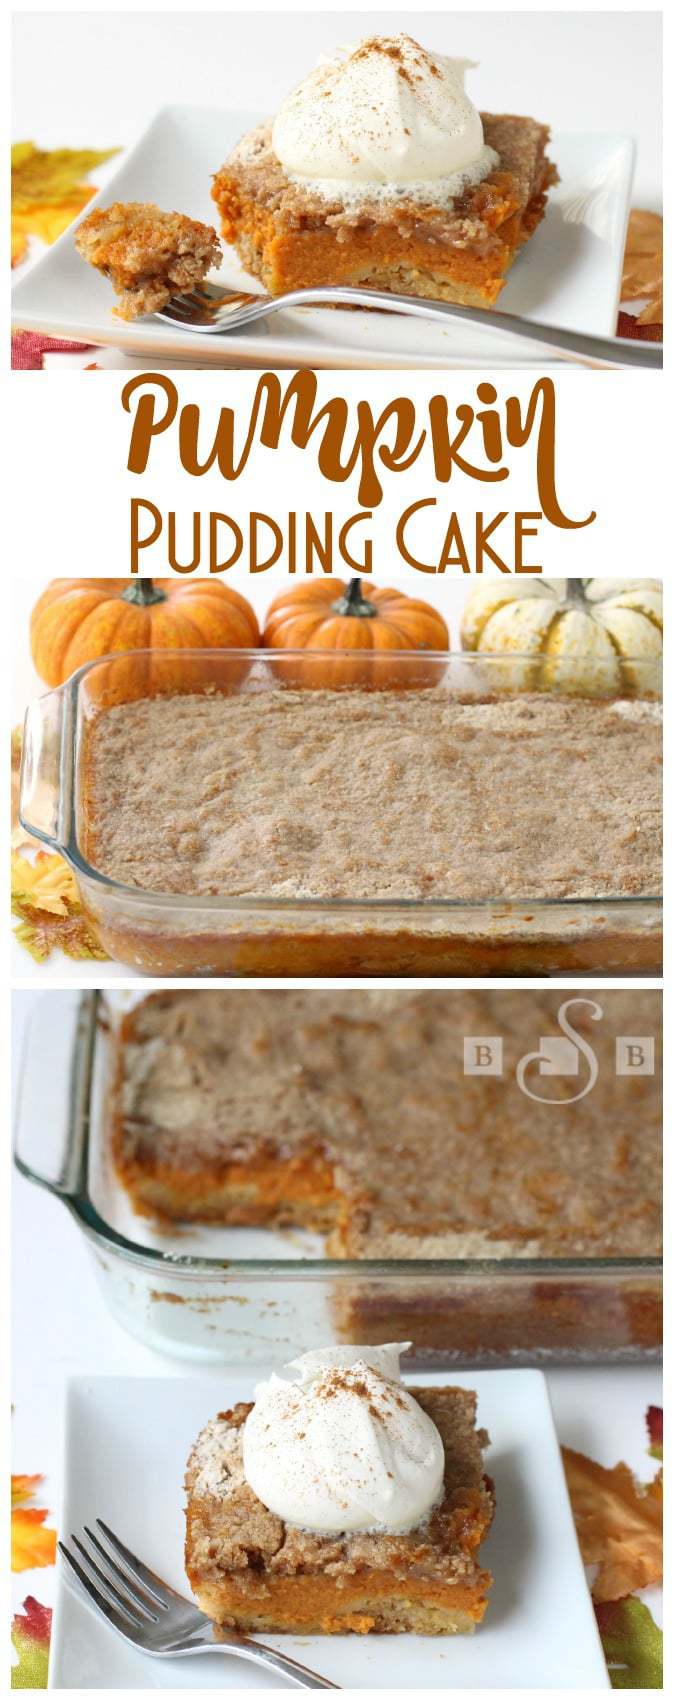 Pumpkin Pudding Cake is made with yellow cake mix, canned pumpkin pie filling, butter, and cinnamon. It's a perfect, delicious alternative for Pumpkin Pie! Or serve the two side by side and enjoy the best of both worlds!